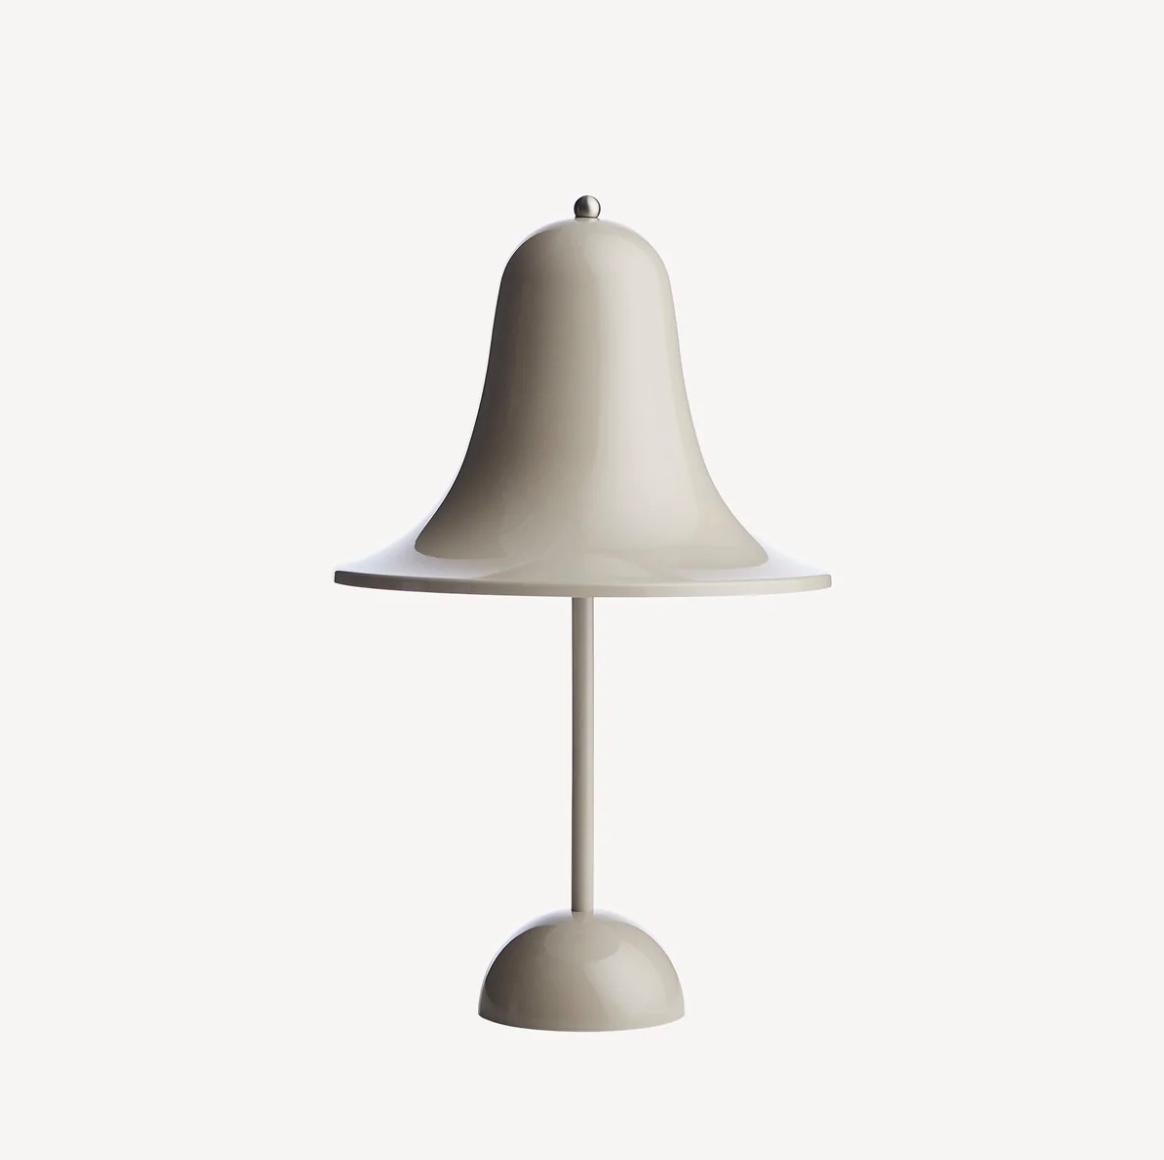 Verner Panton 'Pantop Portable' table lamp in 'Grey Sand' for Verpan. Designed in 1980. New, current production.

This is a versatile smaller and wireless version of the 'Pantop' table lamp, usb-chargeable. 

The elegant Pantop line was designed